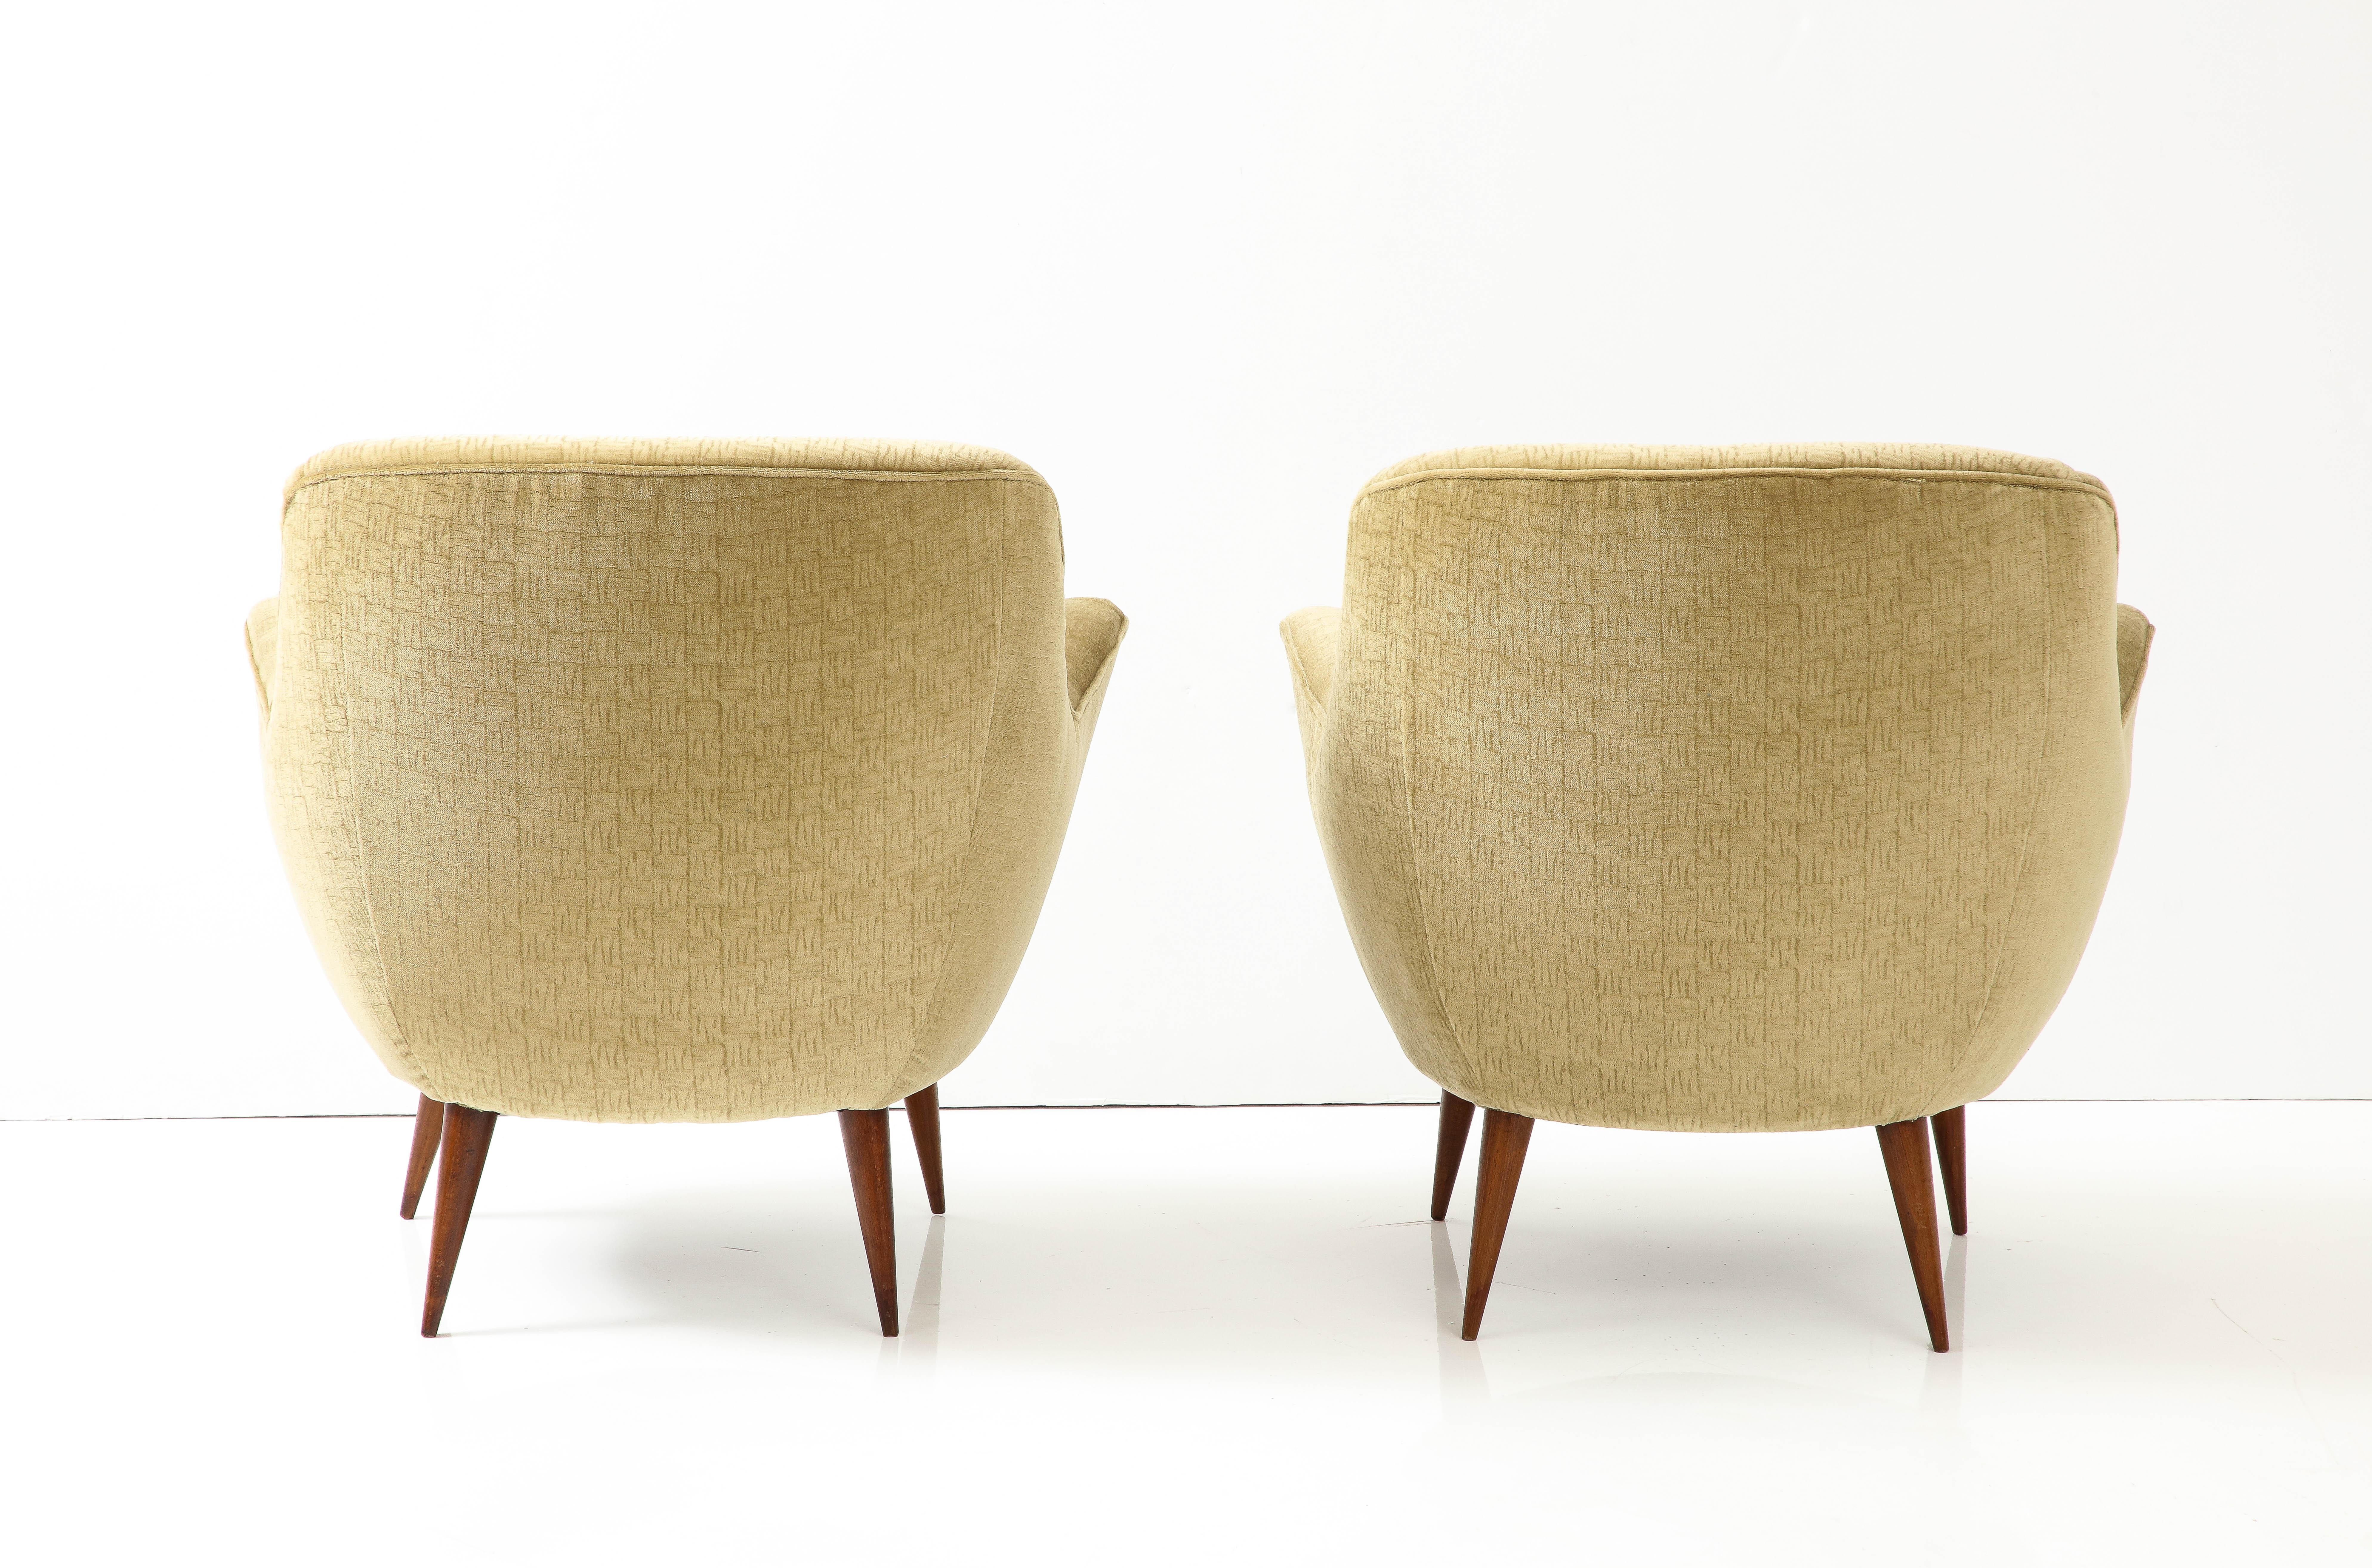 1950's Modernist Gio Ponti Style Italian Lounge Chairs In Mohair Polsterung im Angebot 2